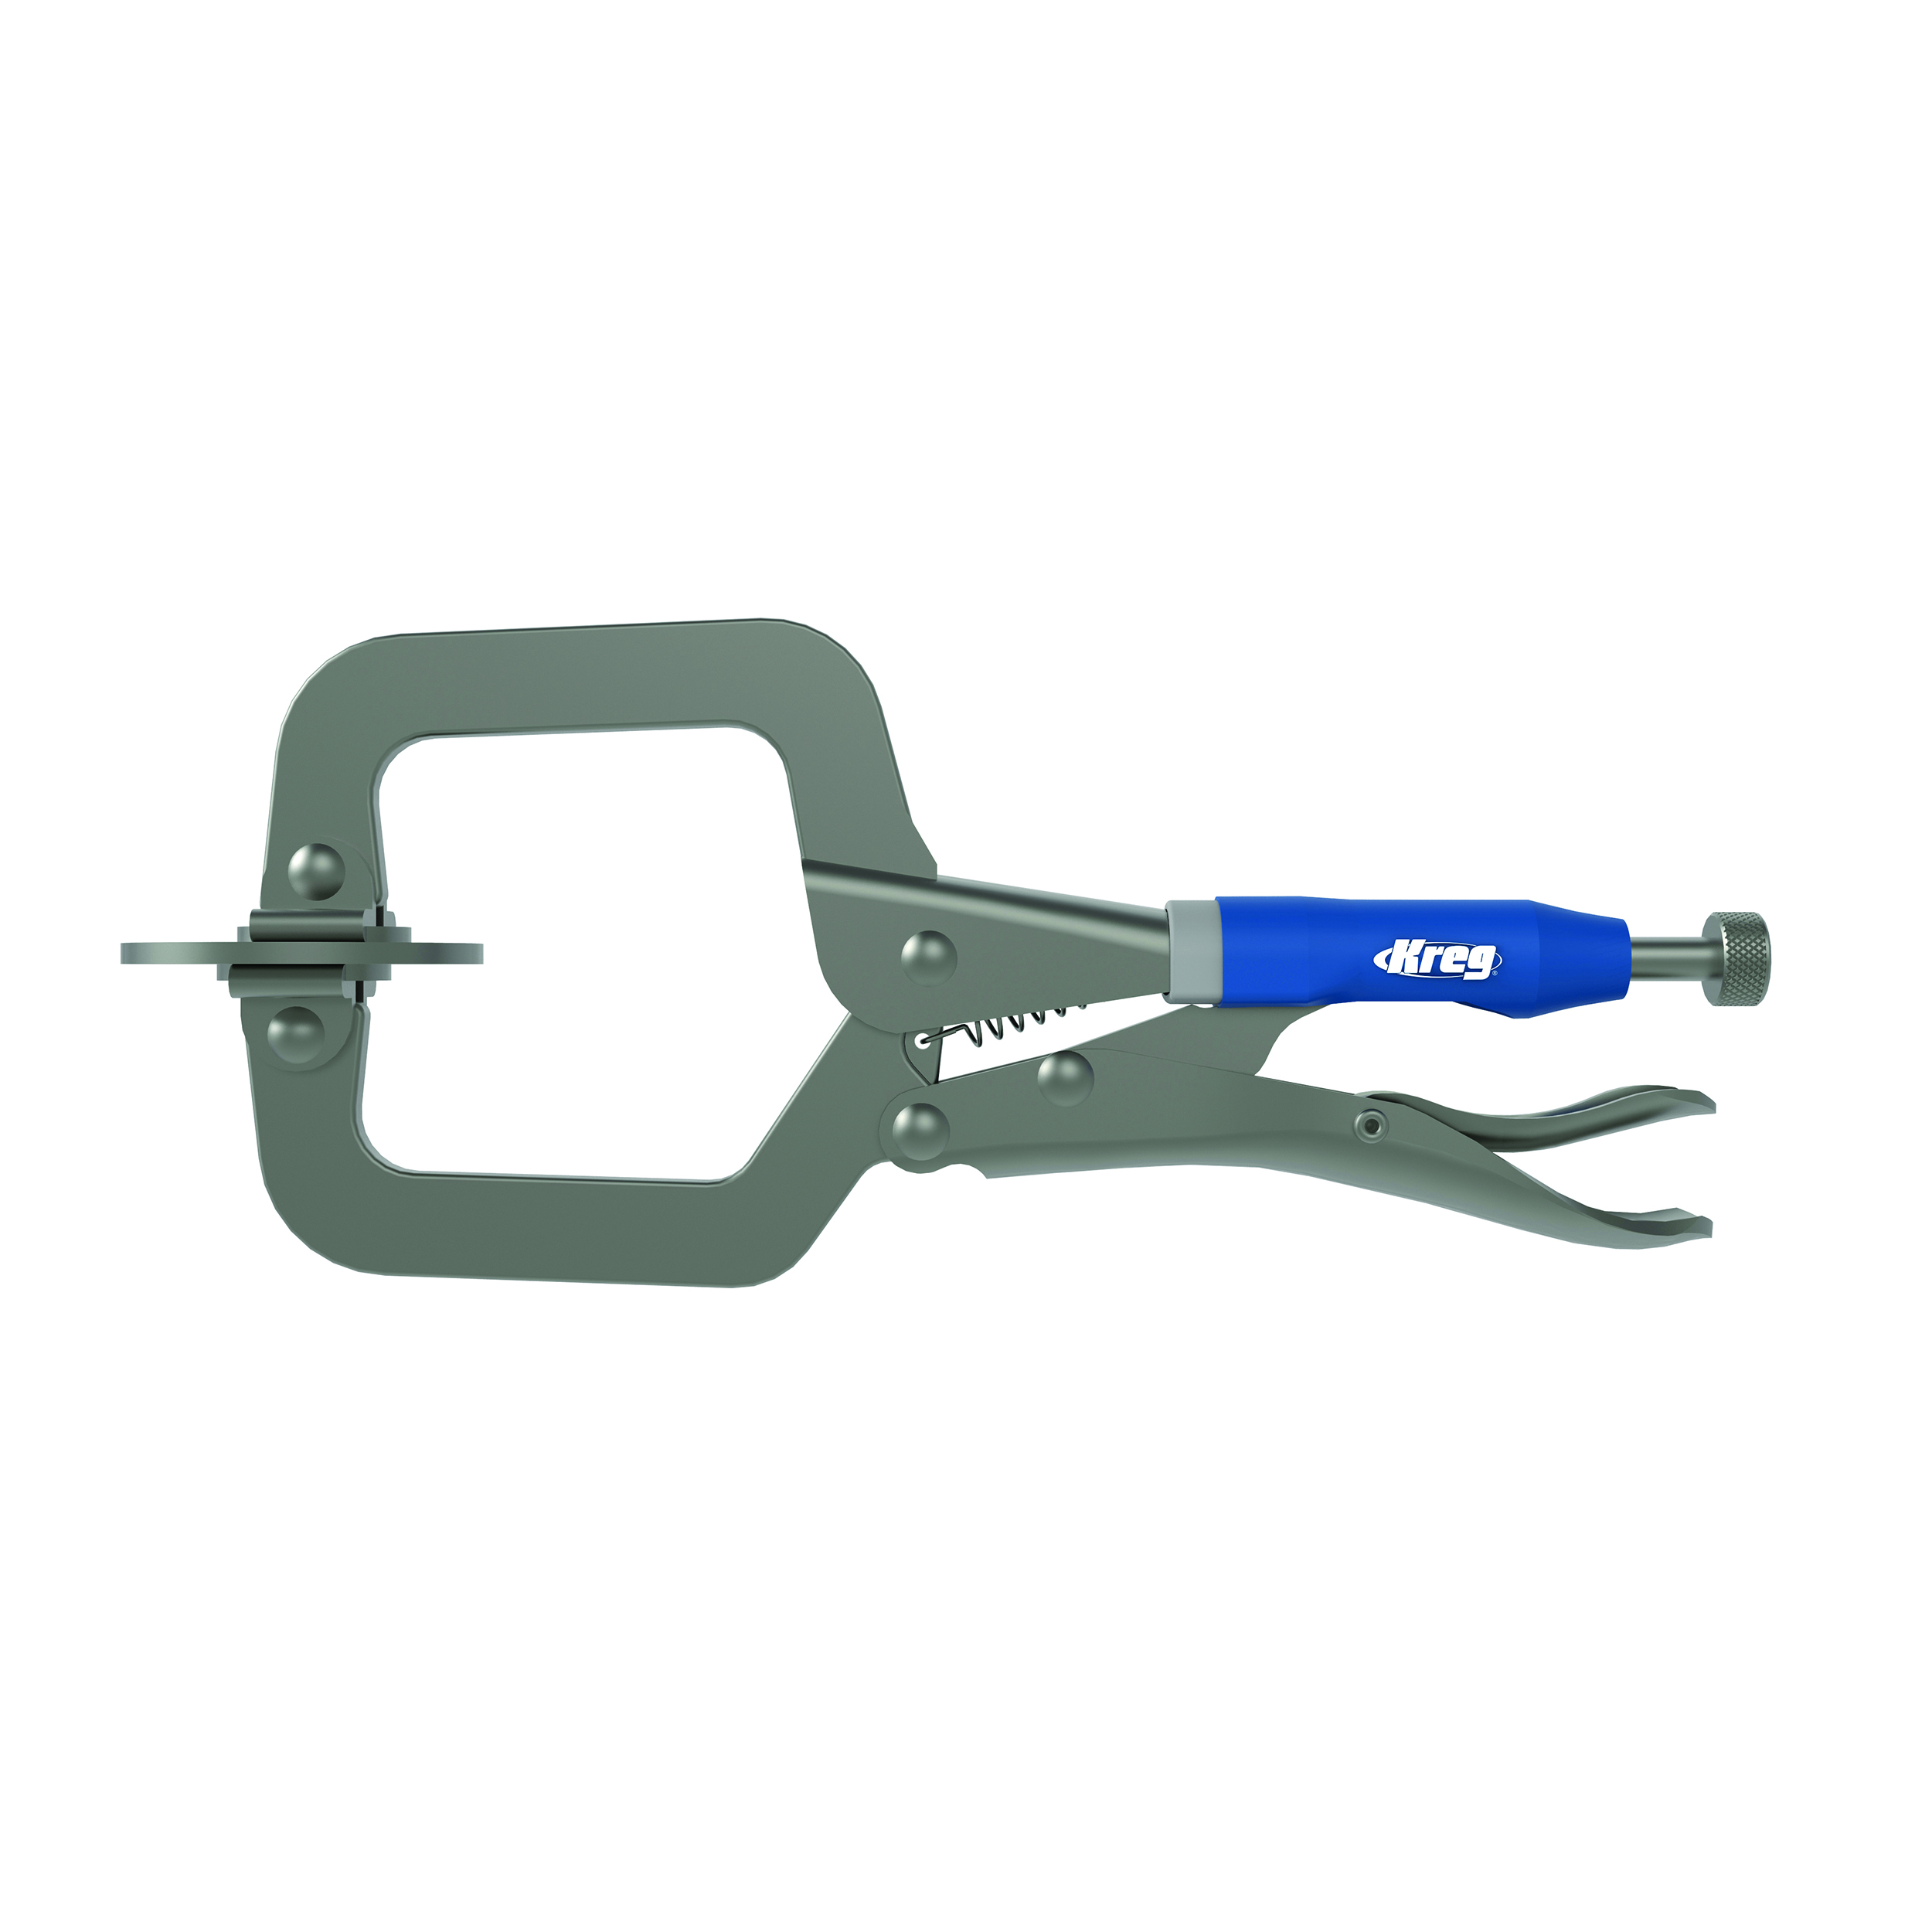 2-inch Classic Face Clamp, # Khc-micro